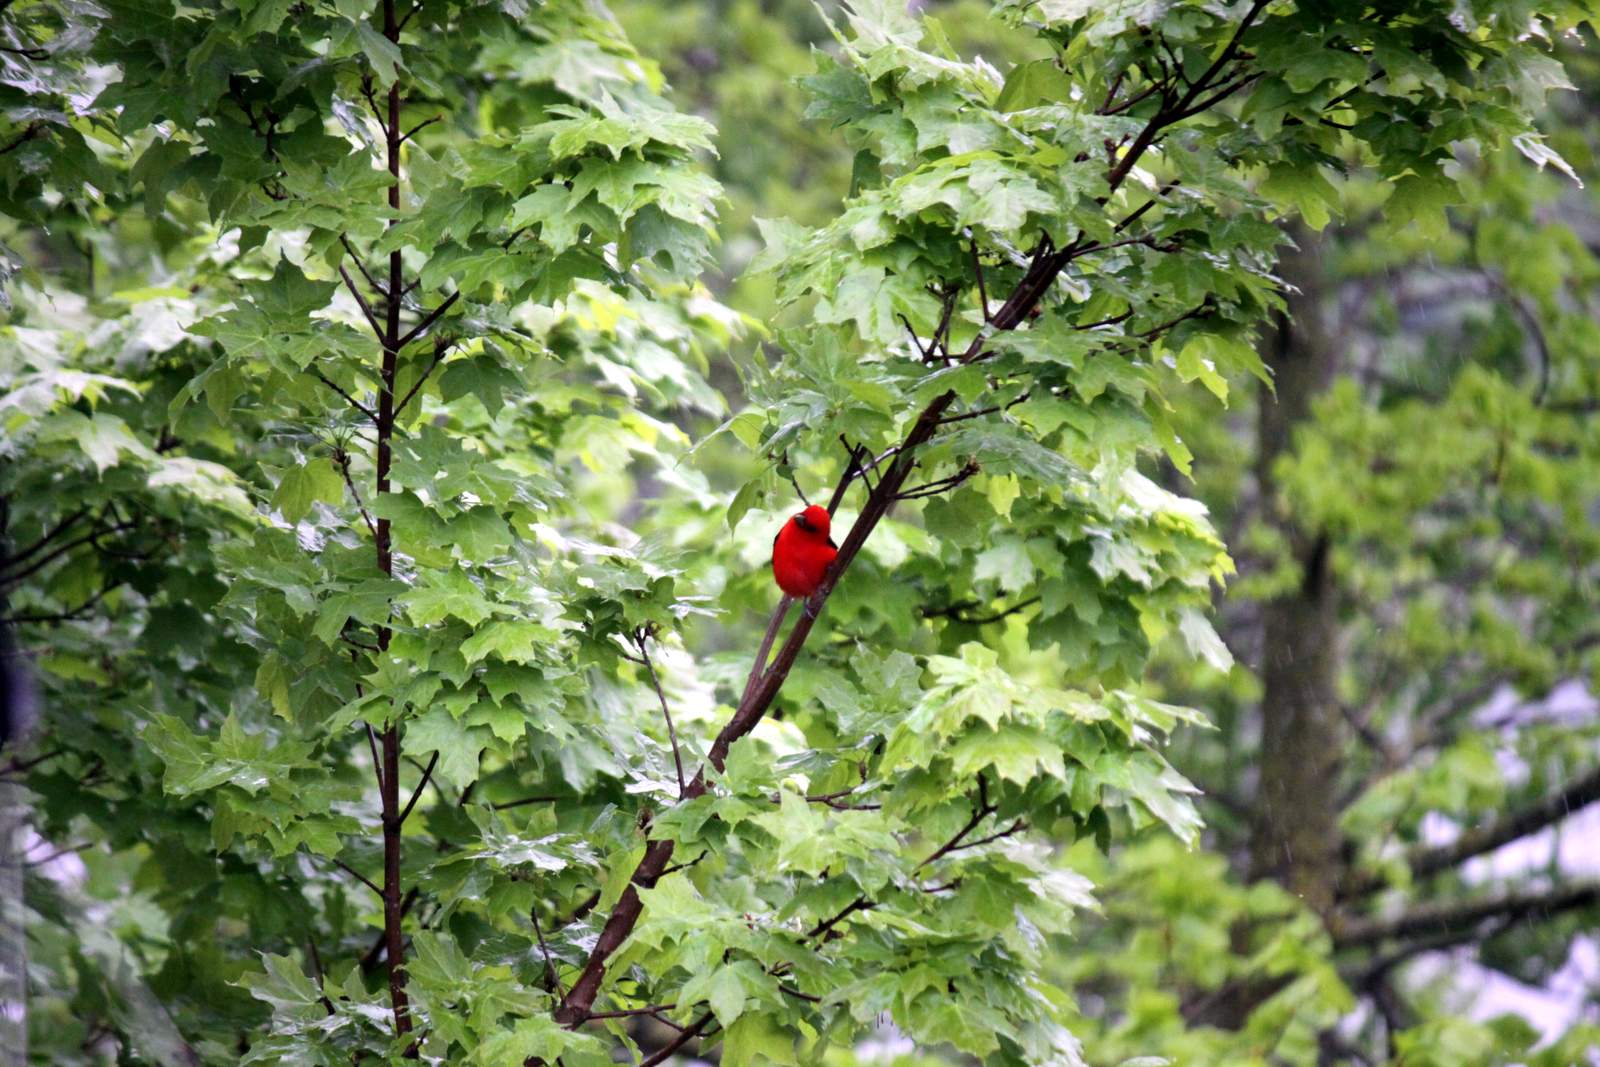 Scarlet Tanager making a short appearance on the Maplelag grounds, May 16th, 2017.